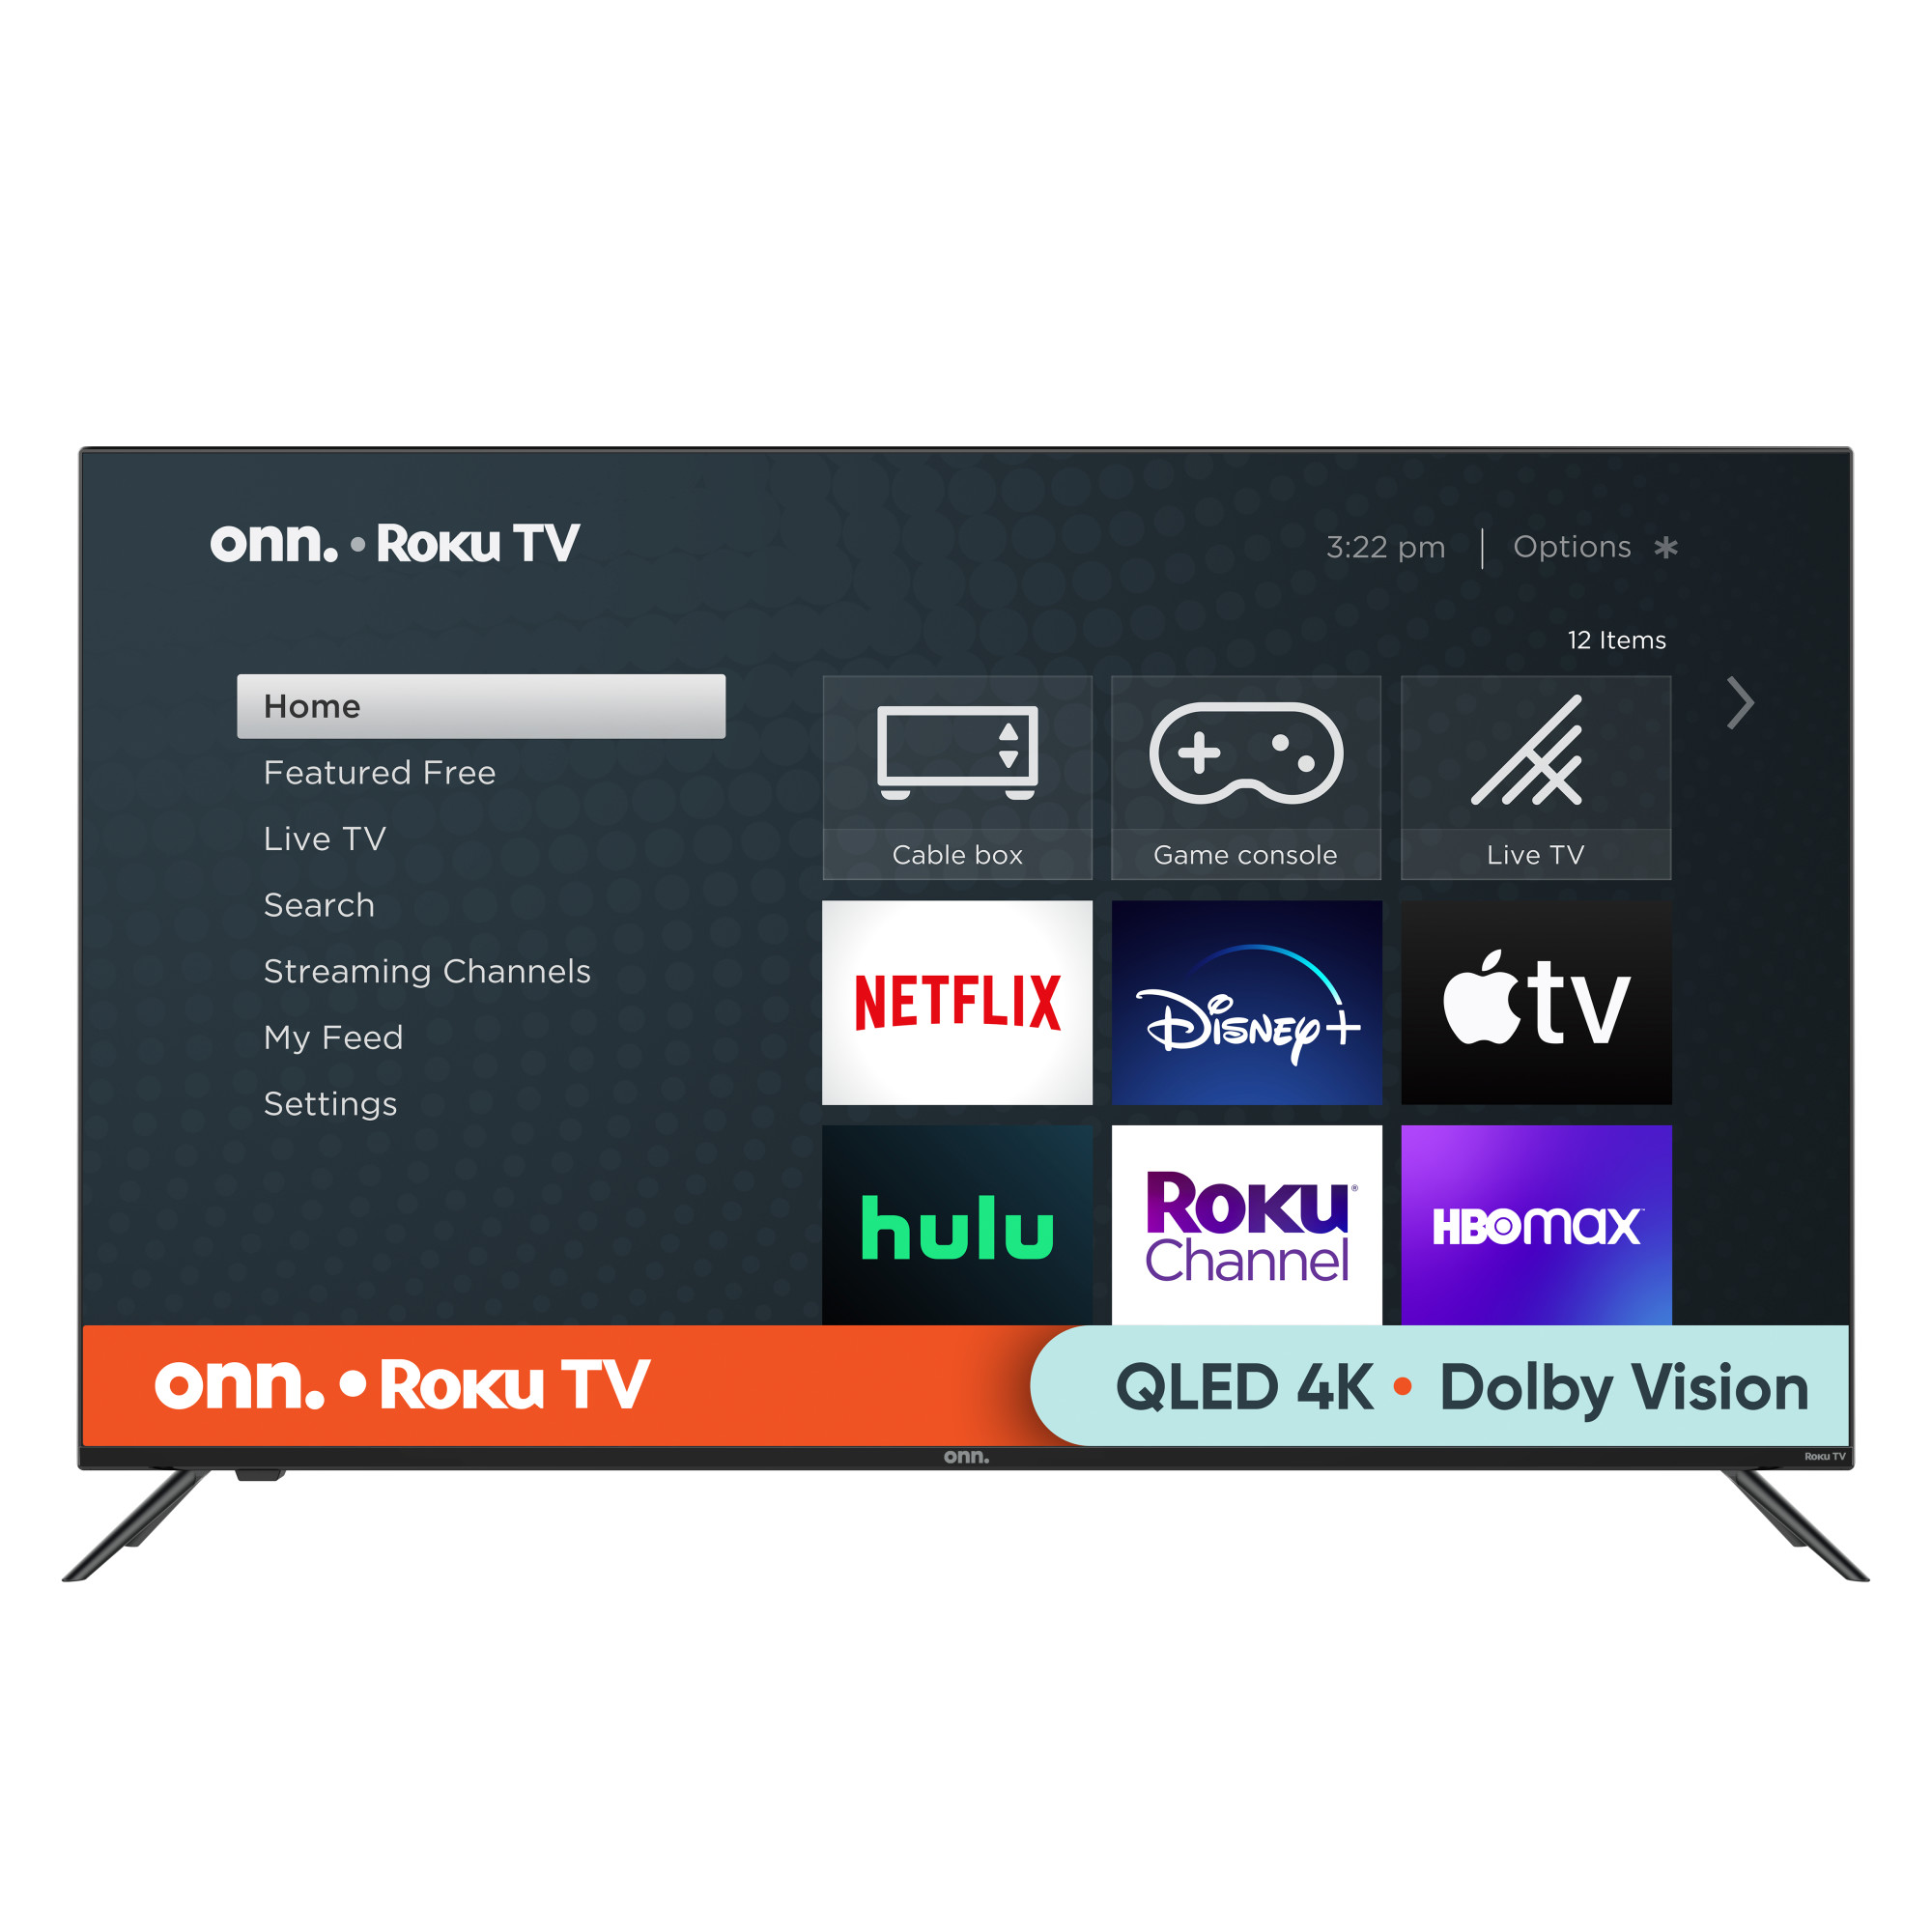 onn. 50” QLED 4K UHD (2160p) Roku Smart TV with Dolby Atmos, Dolby Vision, Local Dimming, 120hz Effective Refresh Rate, and HDR (100071700) - image 4 of 17